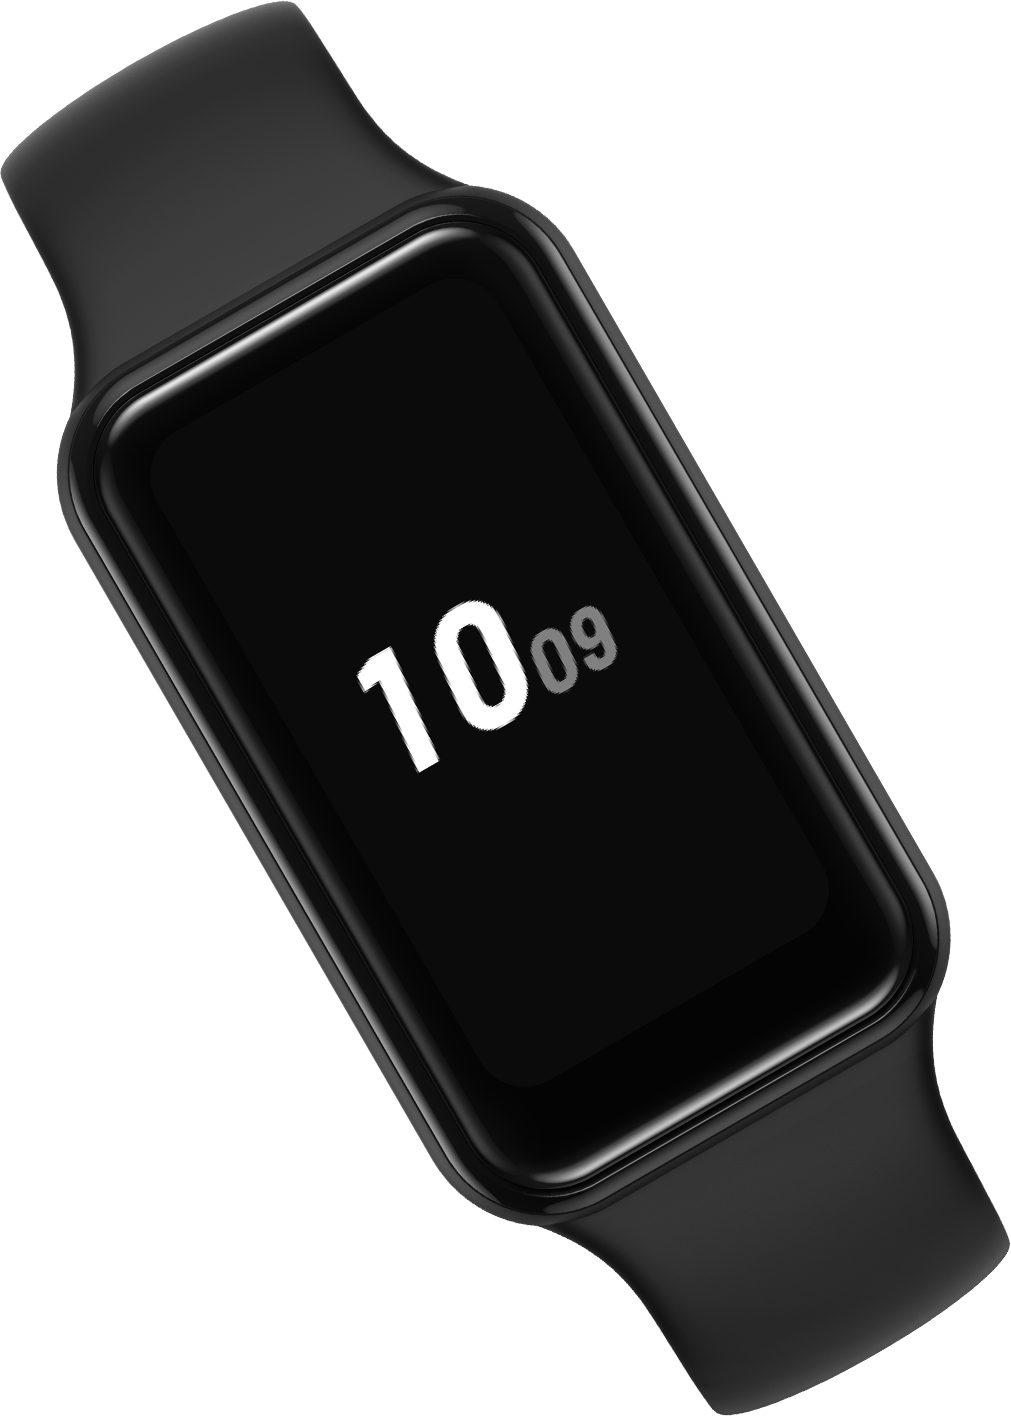 Amazfit Band 7 price, specs, and renderings show that the Xiaomi